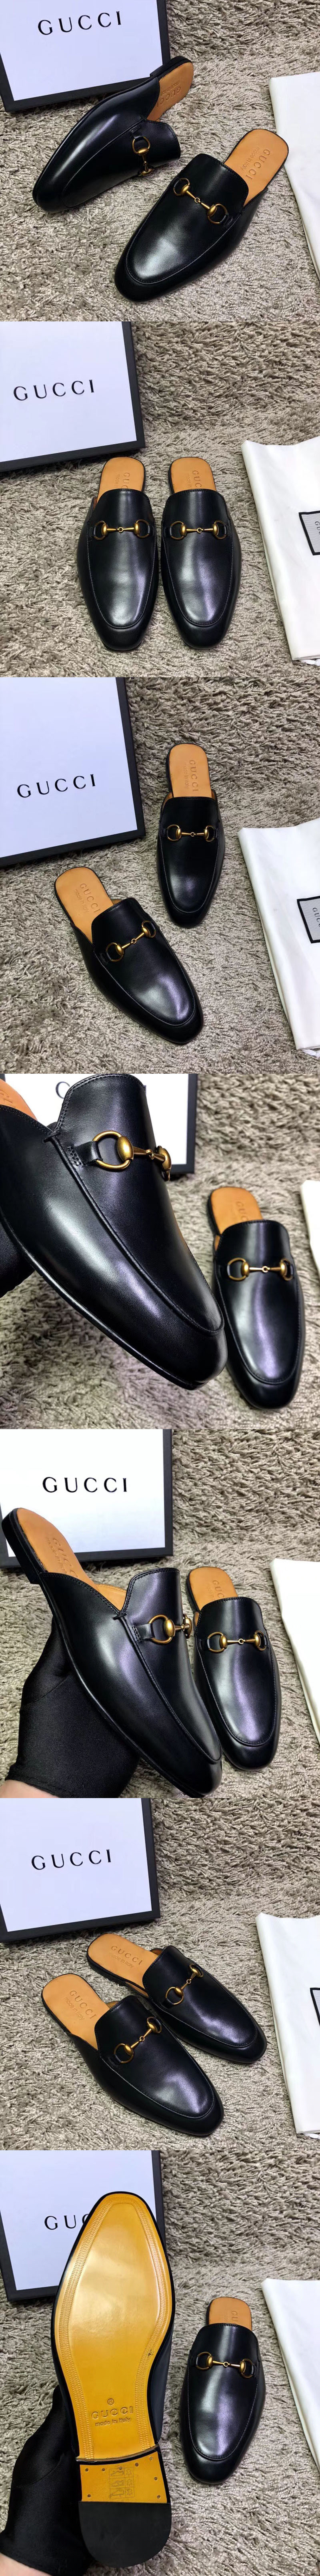 Replica Gucci ‎426219 Leather Horsebit slipper and shoes Black Leather